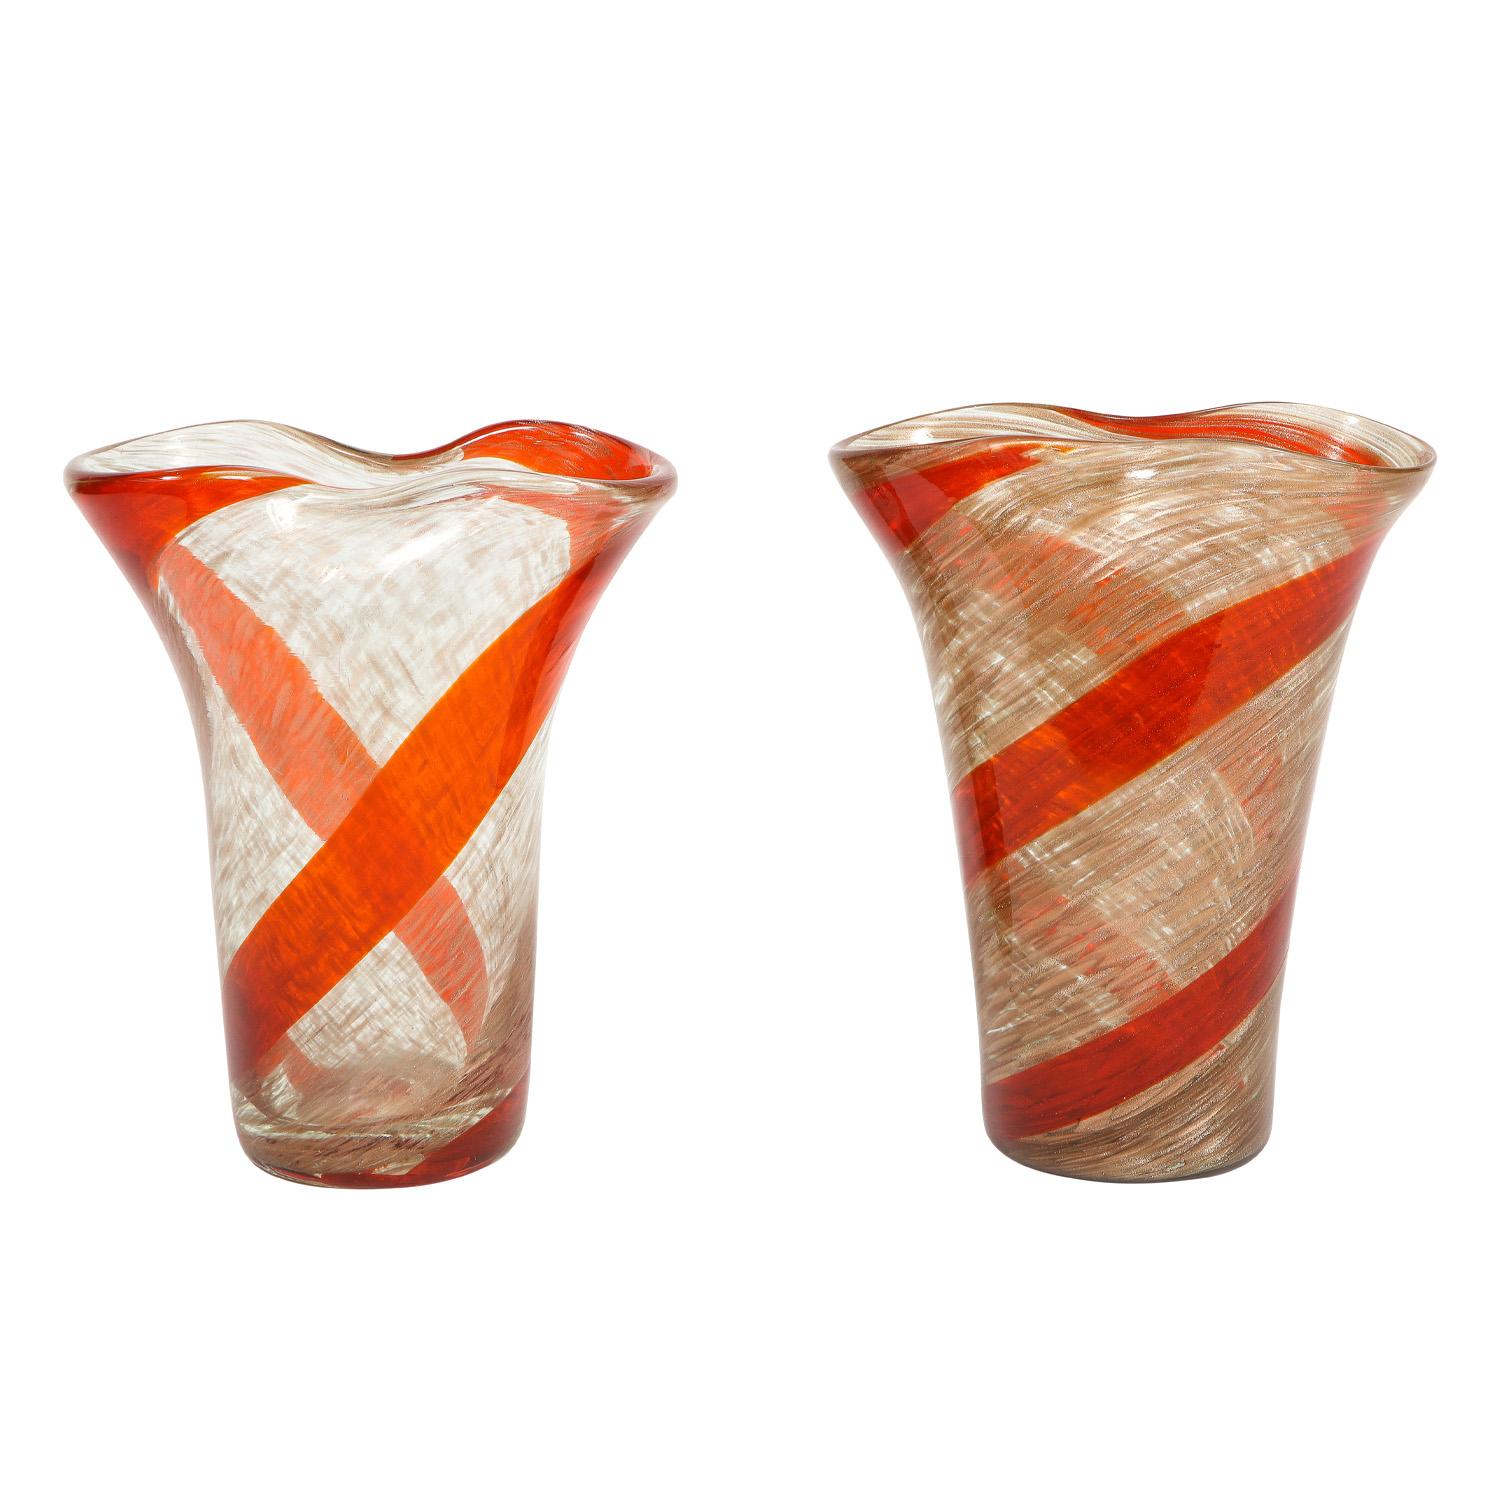 2 Stunning hand-blown glass vases with red spiral design by Fratelli Toso, Murano, Italy, 1950’s. They are pinched at the top with aventurine (gold) throughout the glass. These both shimmer like jewels.